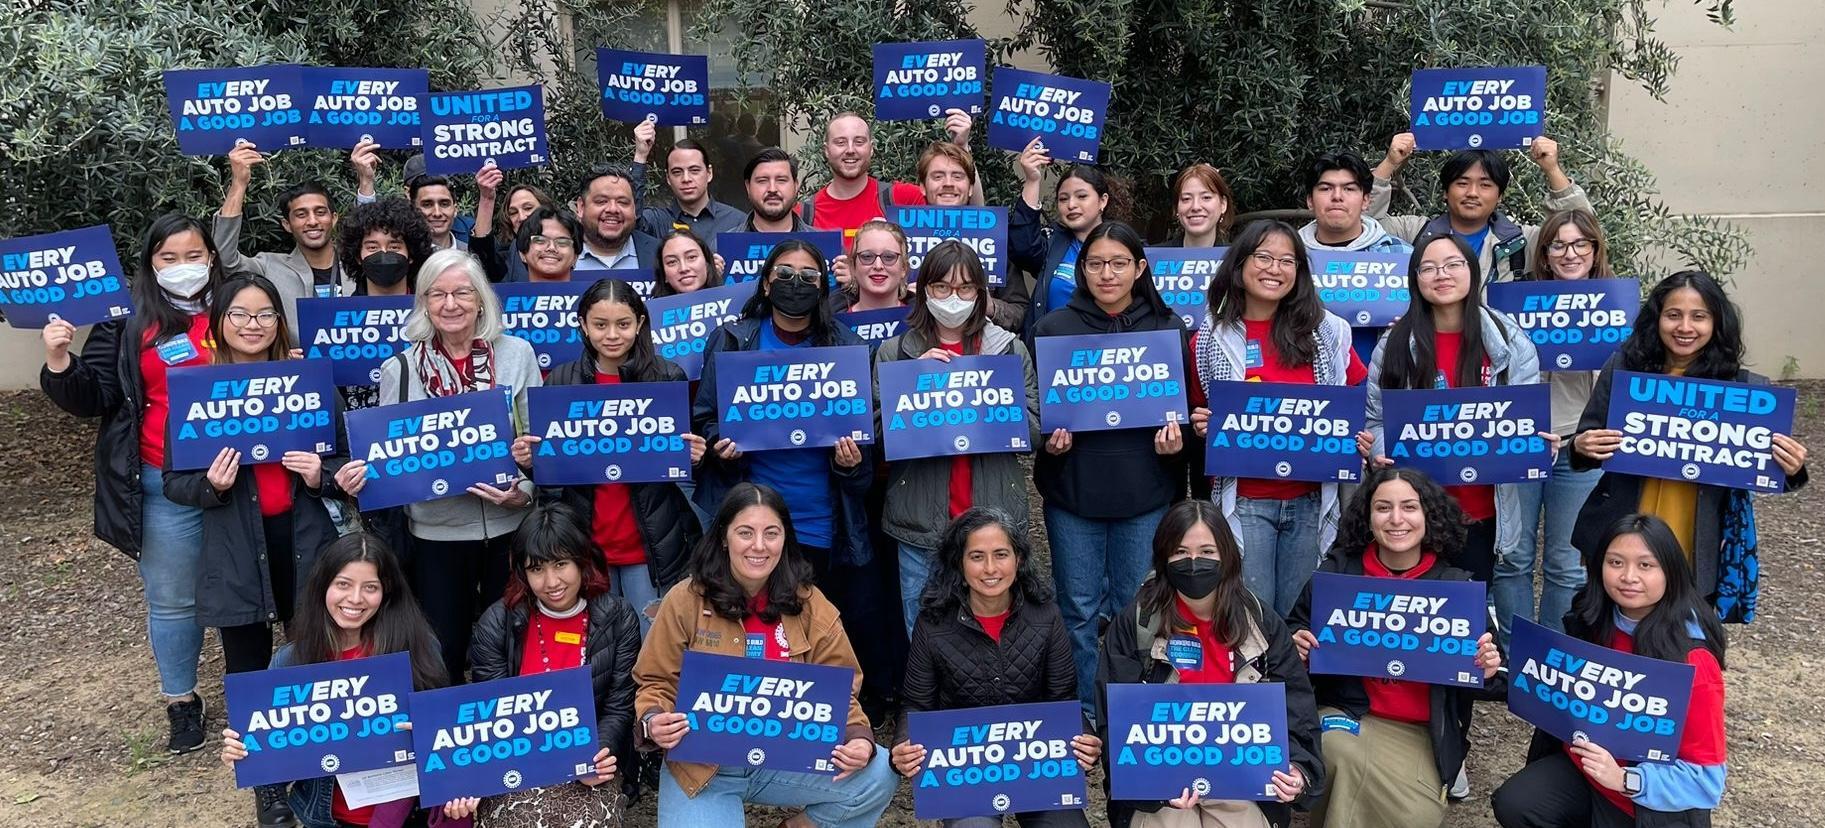 A group of about 30 people posed for a photo holding signs reading "EVery auto job a good job"